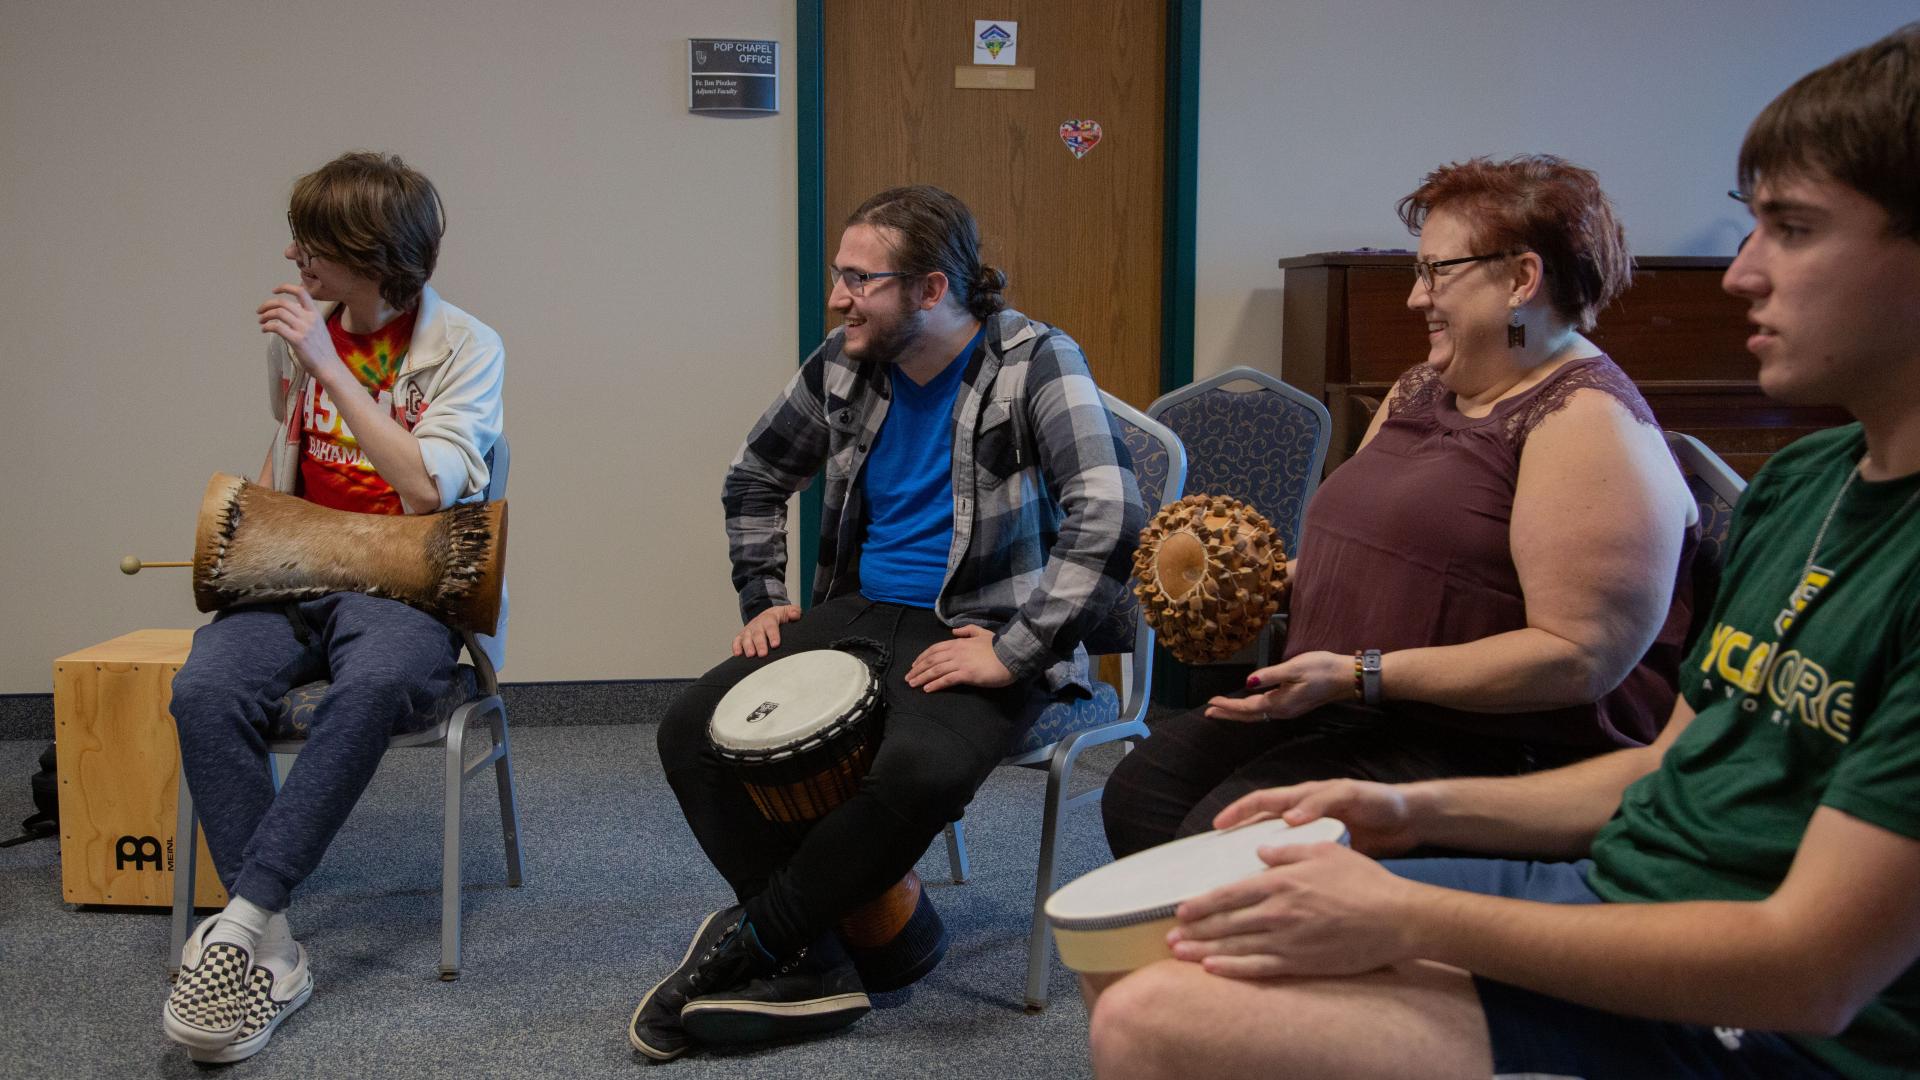 Four Music Therapy students playing percussion instruments in a classroom sitting down